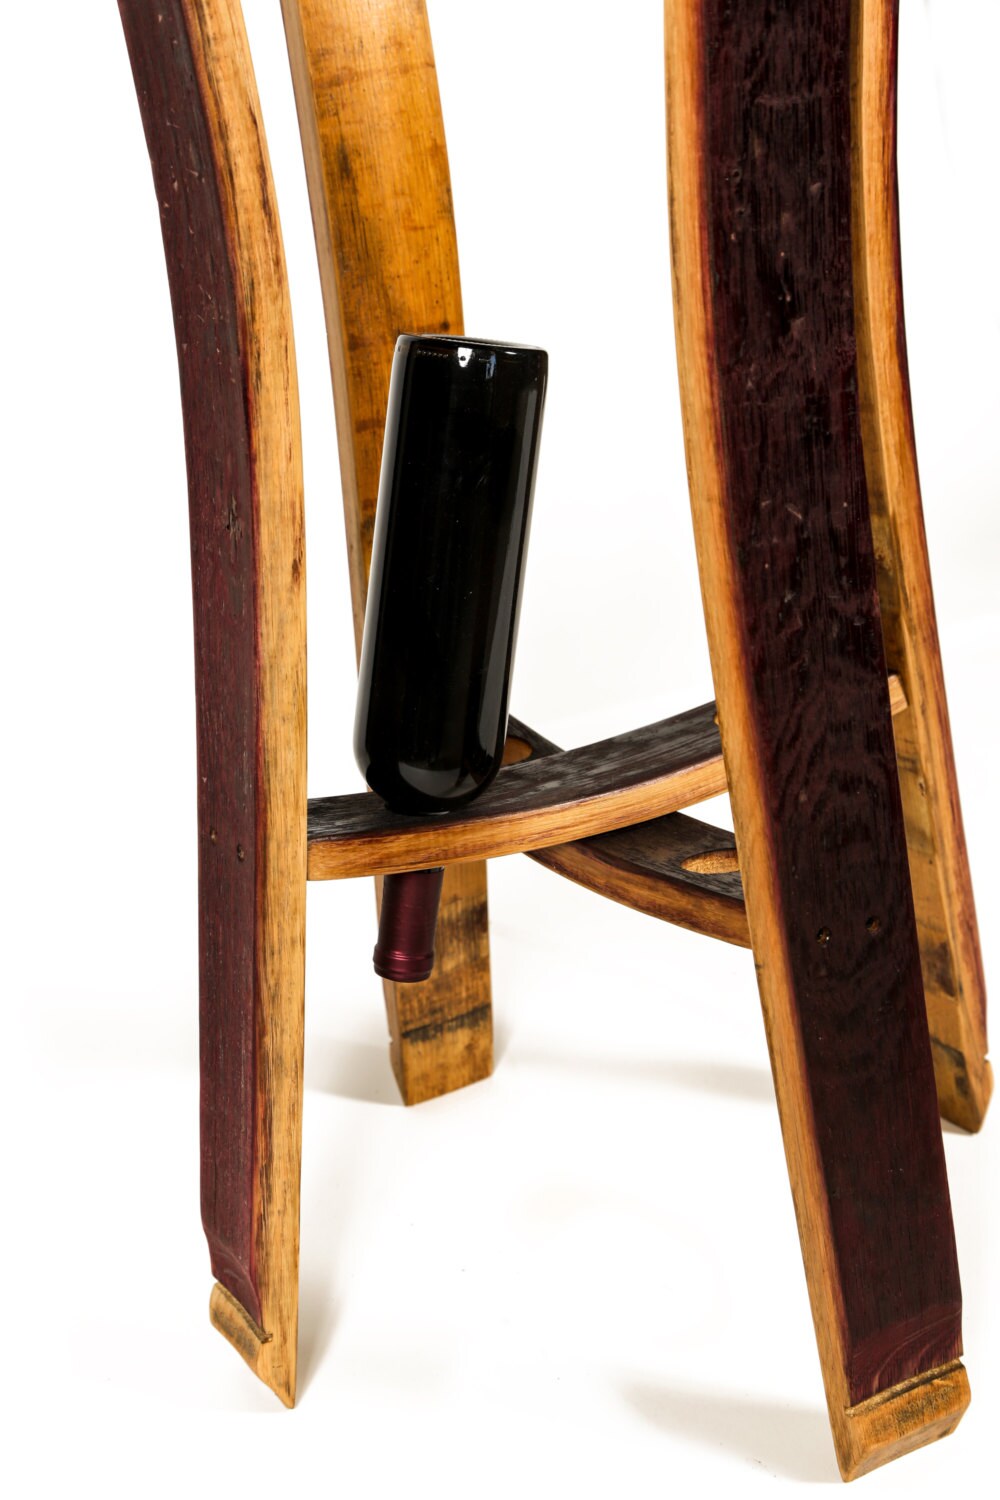 Wine Barrel Side Tasting Table - Serenoa 2 - made from retired Napa wine barrels. 100% Recycled!